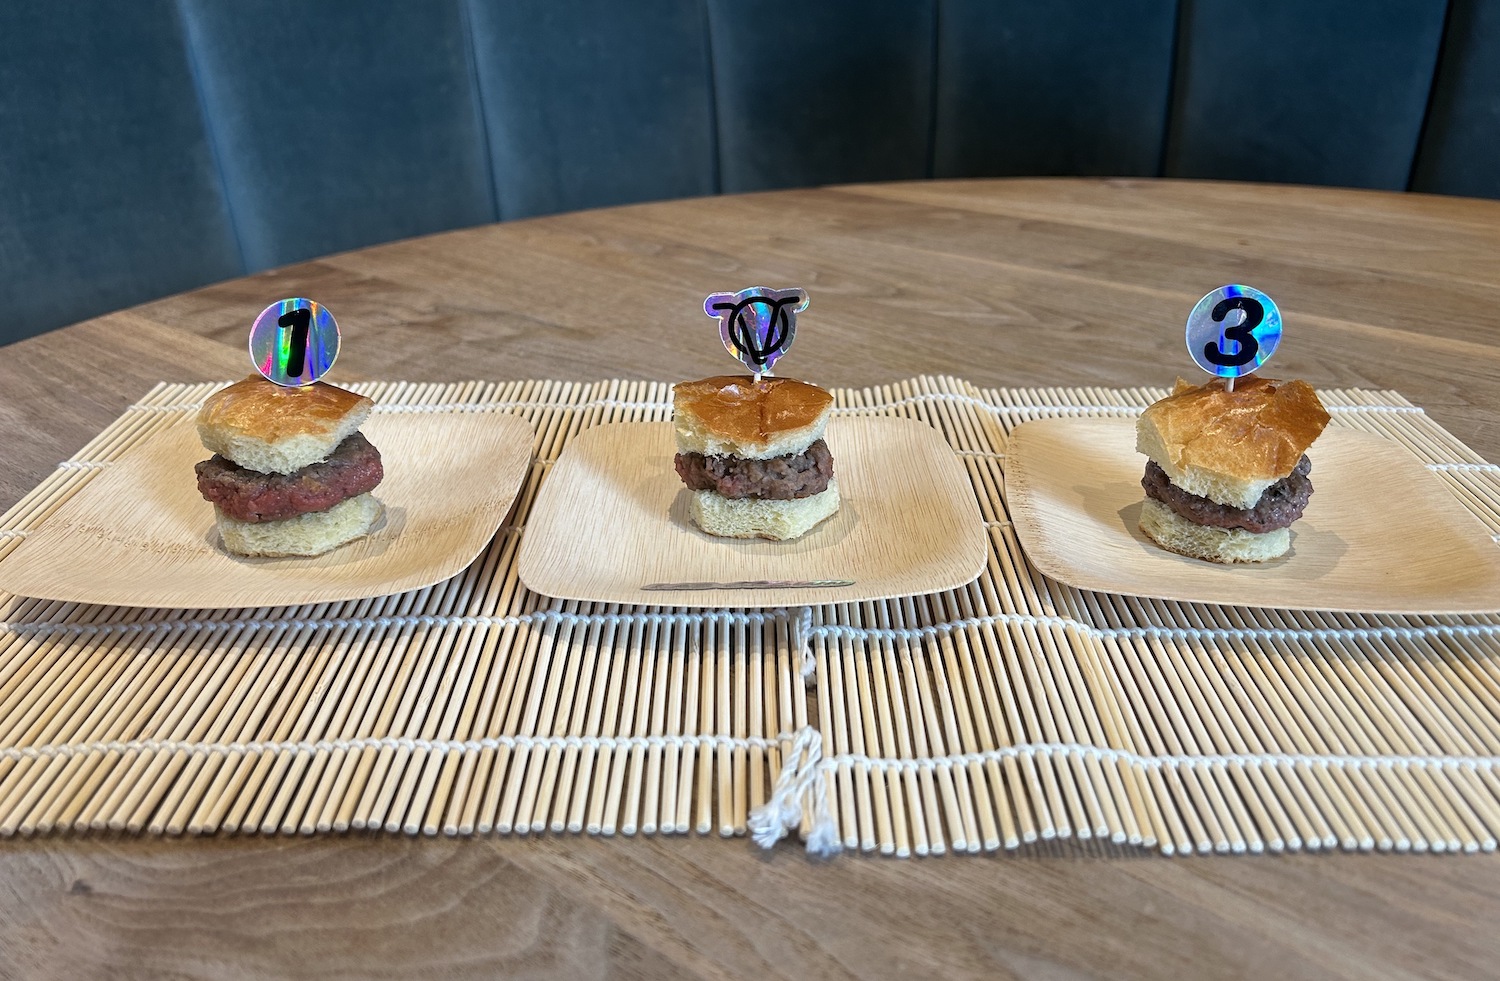 three small burgers each on separate plates that have different labels on toothpicks in the buns.